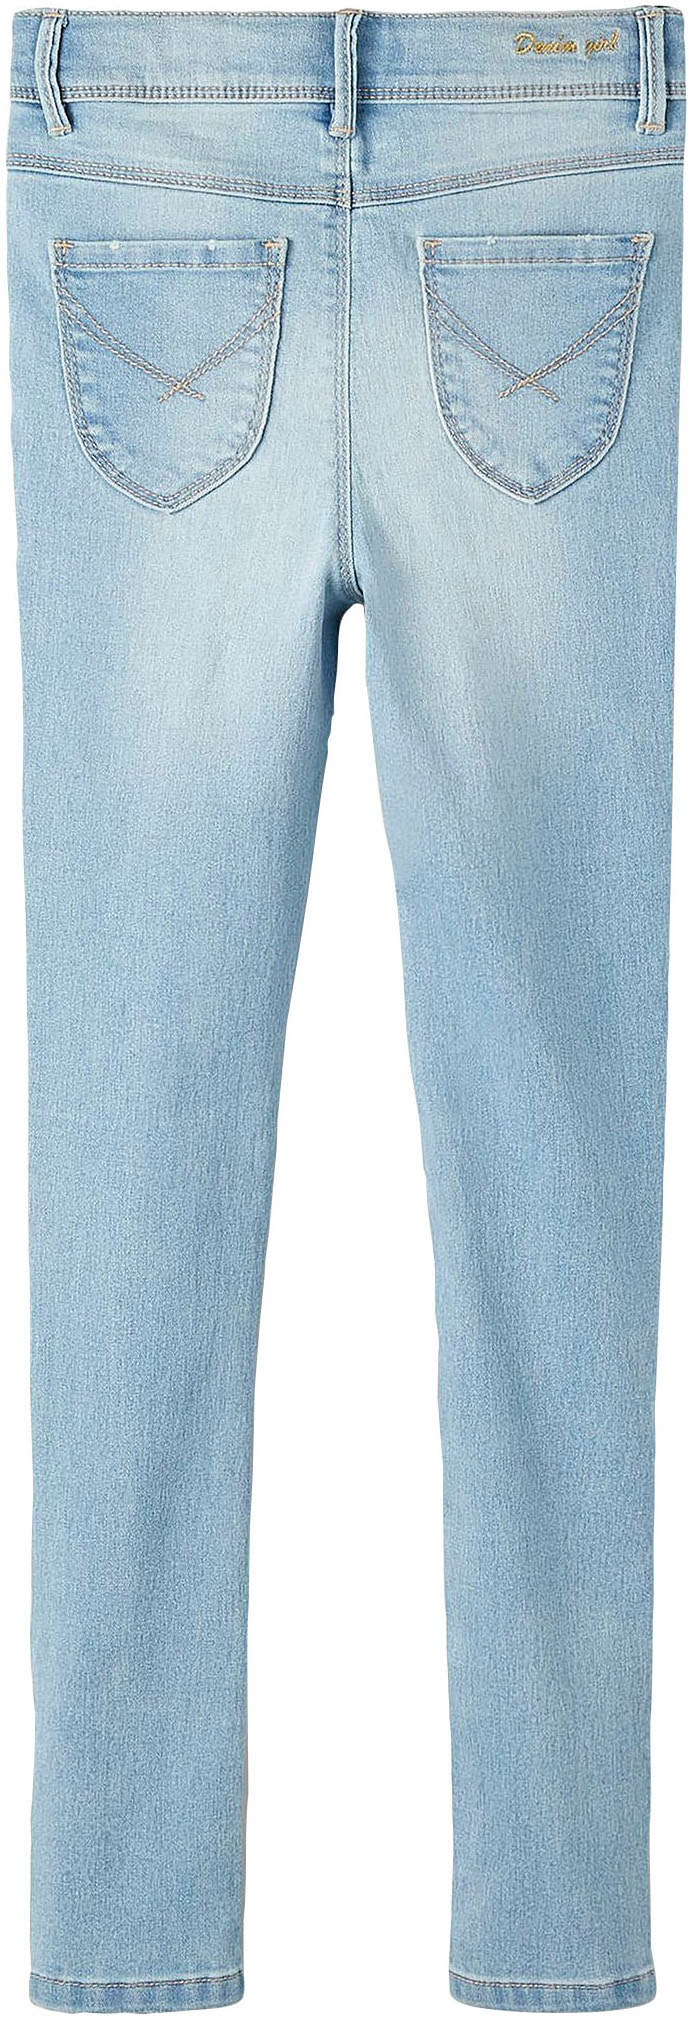 Name »NKFPOLLY PB« PANT Skinny-fit-Jeans It OTTO DNMTHRIS bei HW